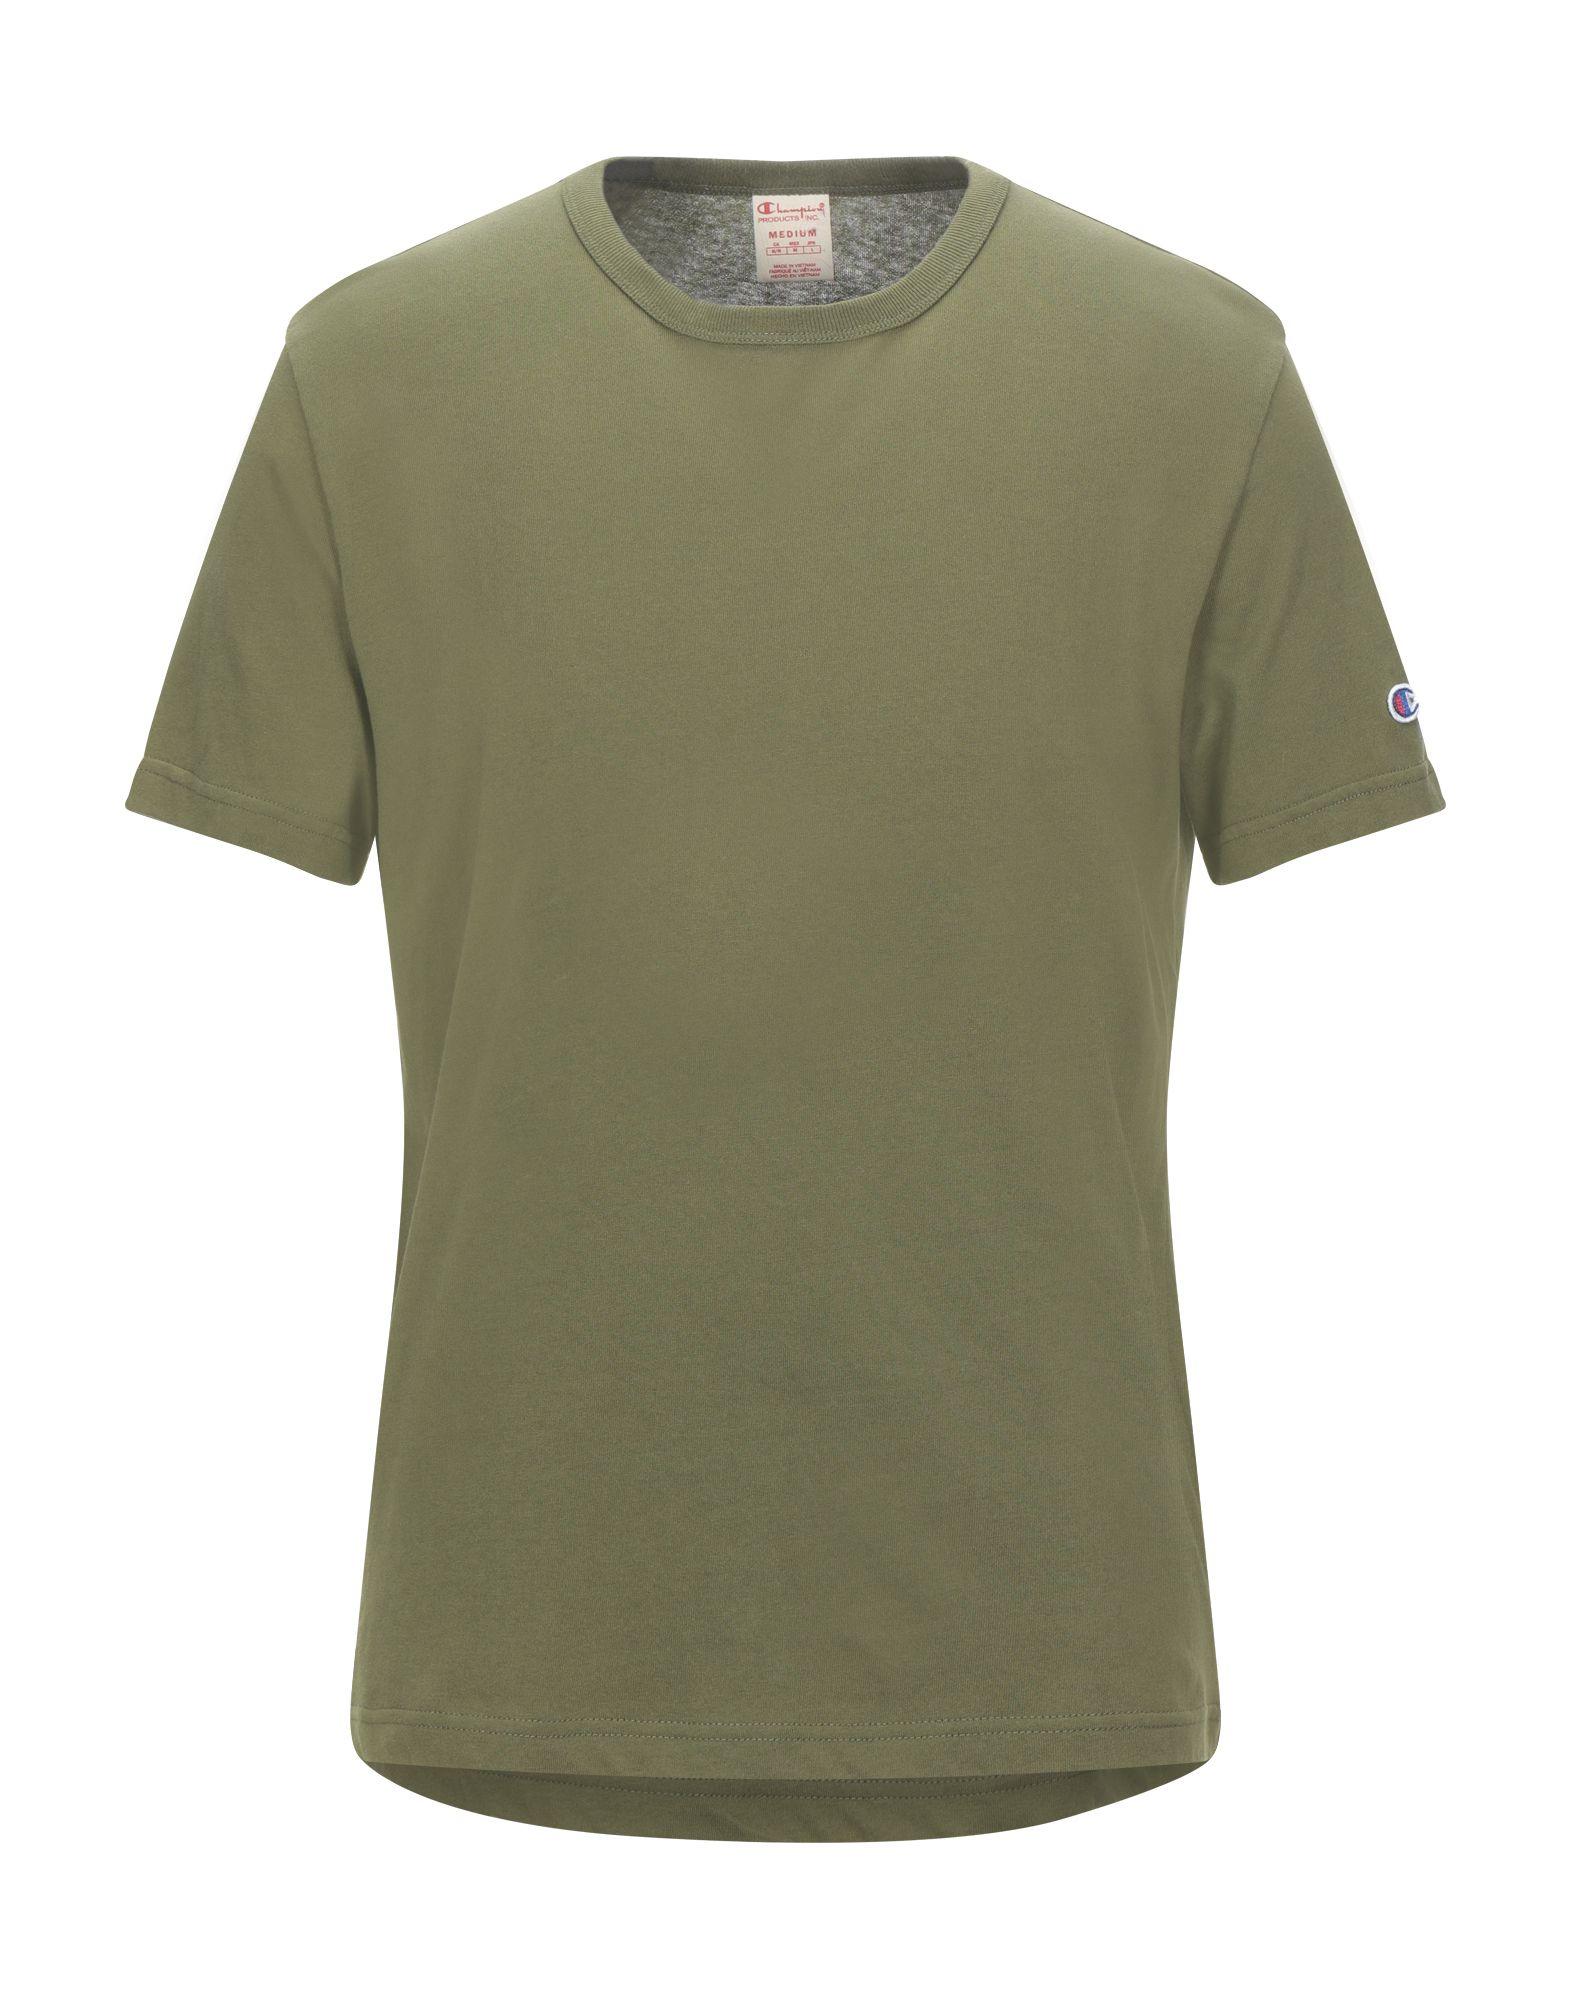 Champion T-shirt in Military Green (Green) for Men - Lyst